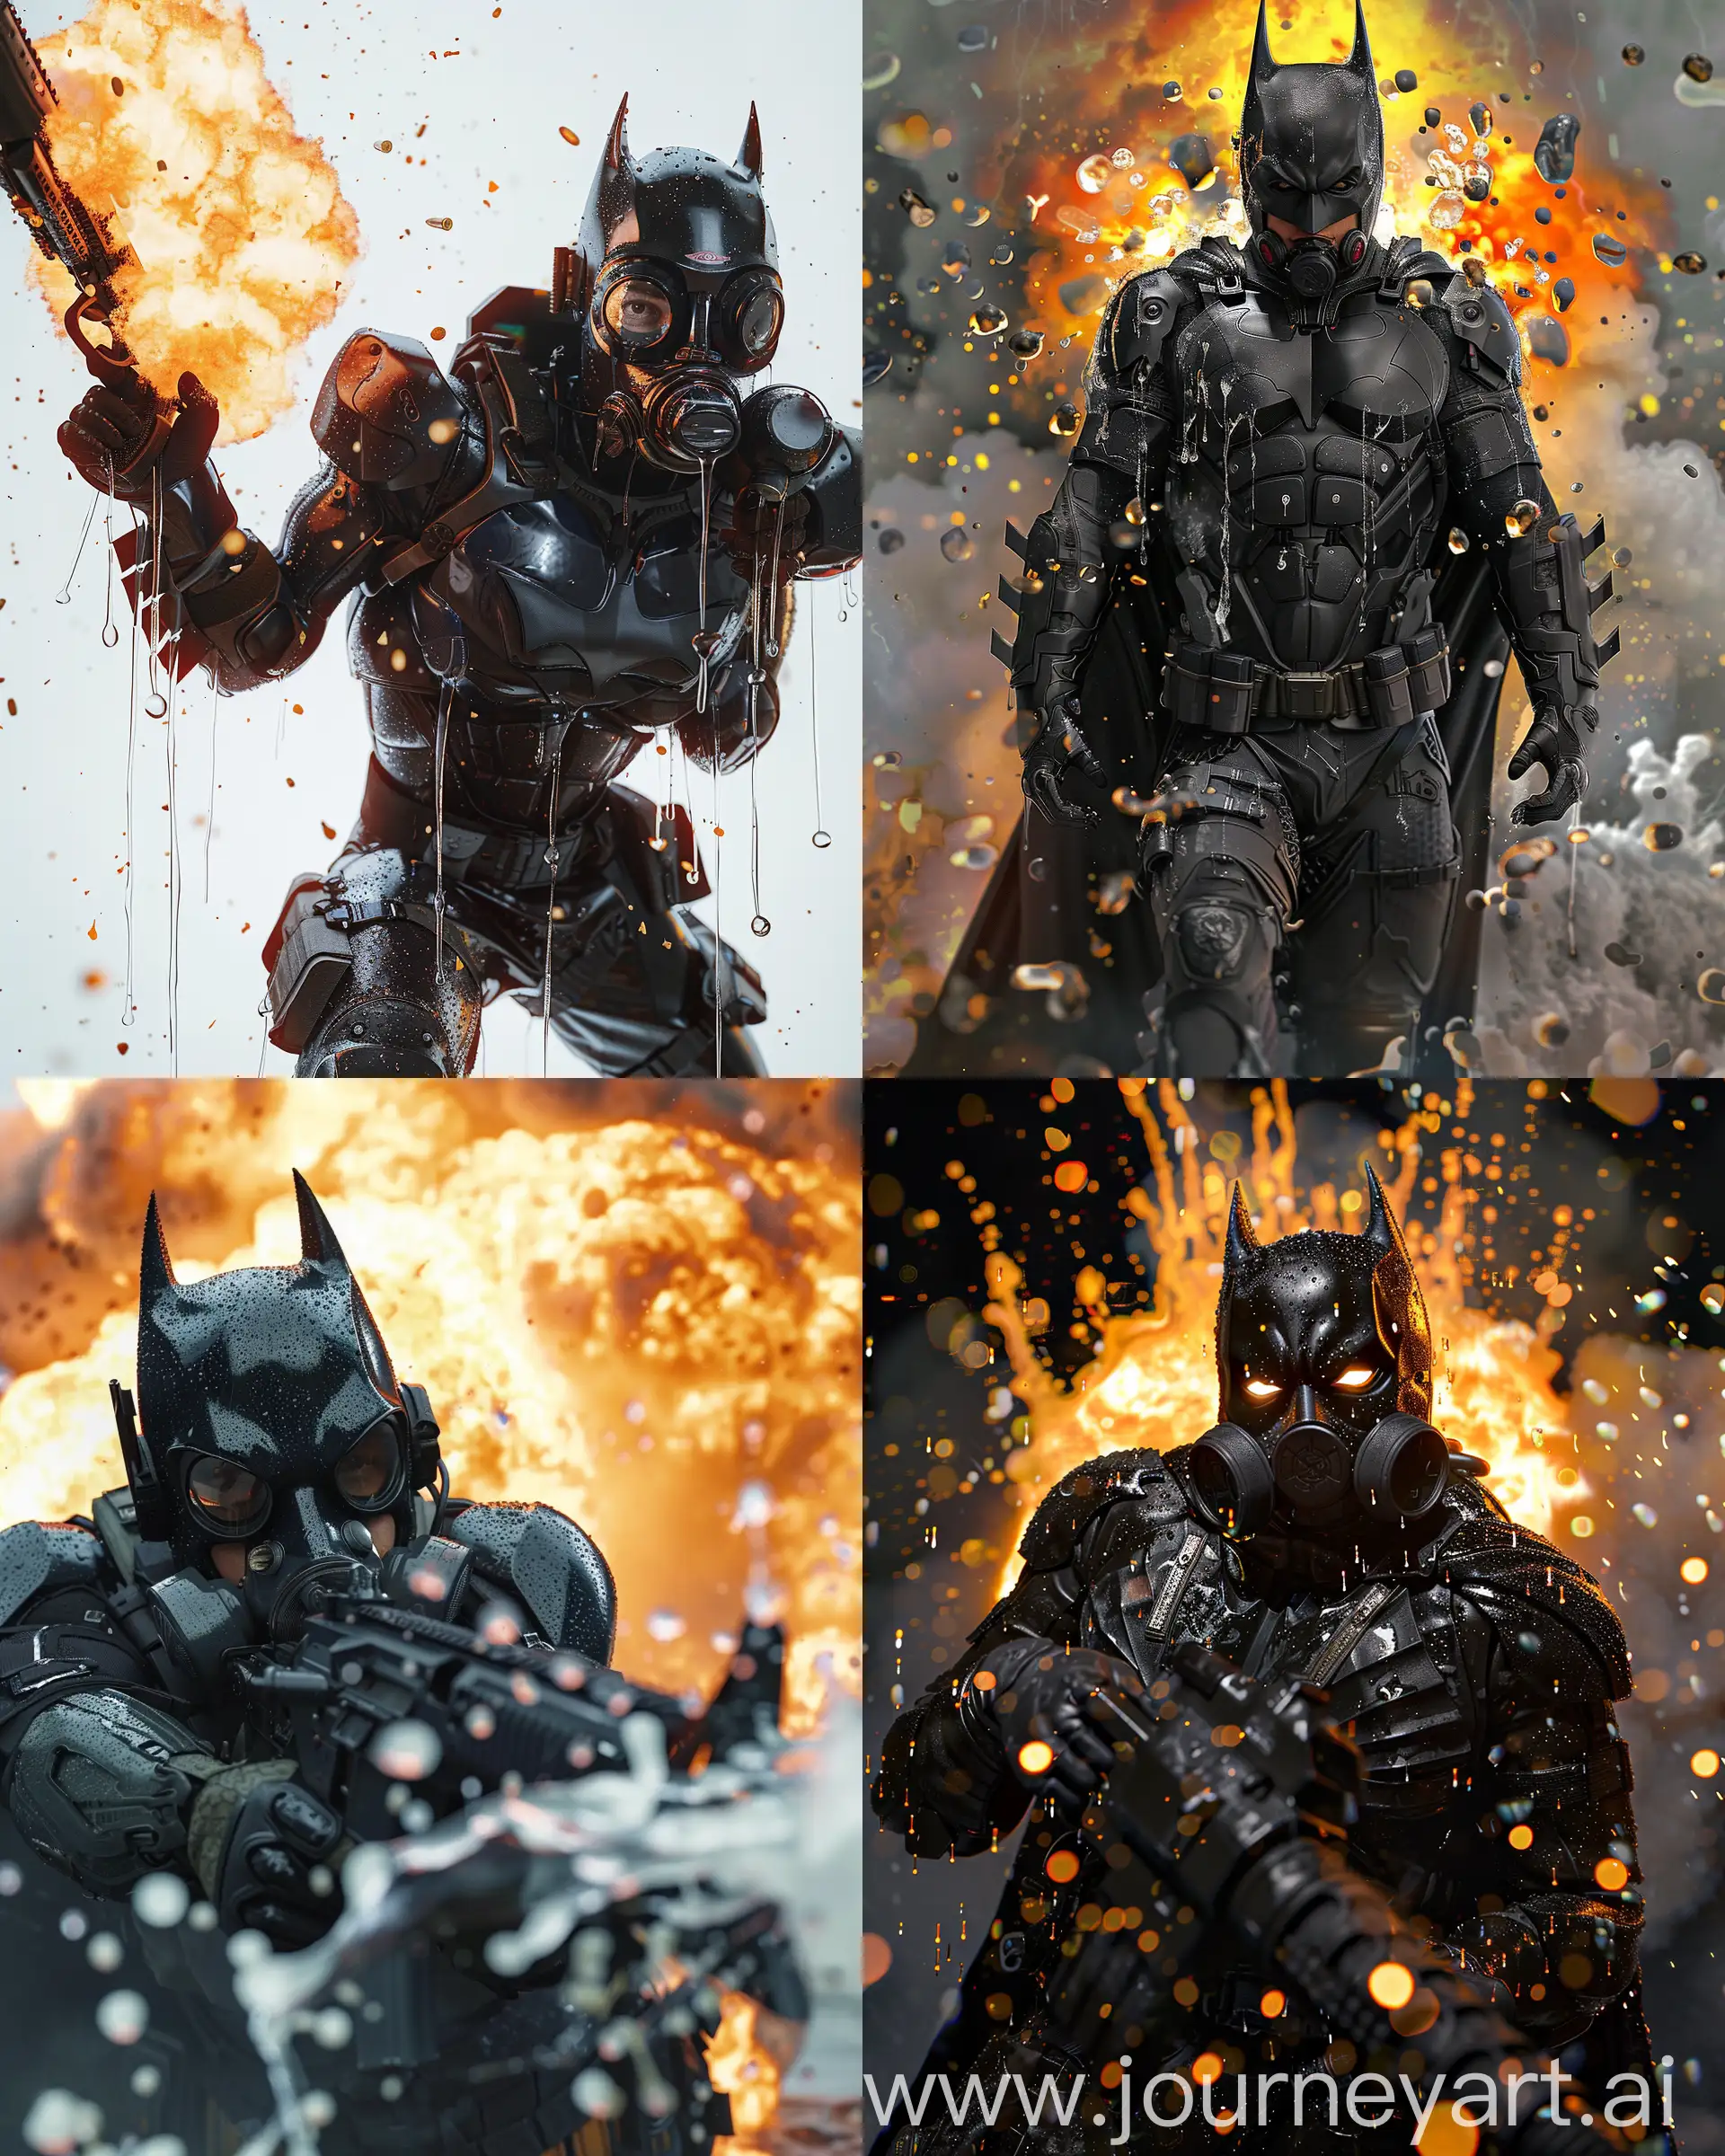 Hyperrealism Futuristic sci-fi high-tech s military soldier as  batman from justice league 2021 as military soldier from call of duty video game with gas mask and advanced weapons and ammunition , resulting in a spectacular explosion within an action-packed cinematic setting reminiscent of a high-budget film, glossy dripping wet body, sport photography, realistic perspective   --stylize 50 --v 6.0 --style raw --ar 4:5